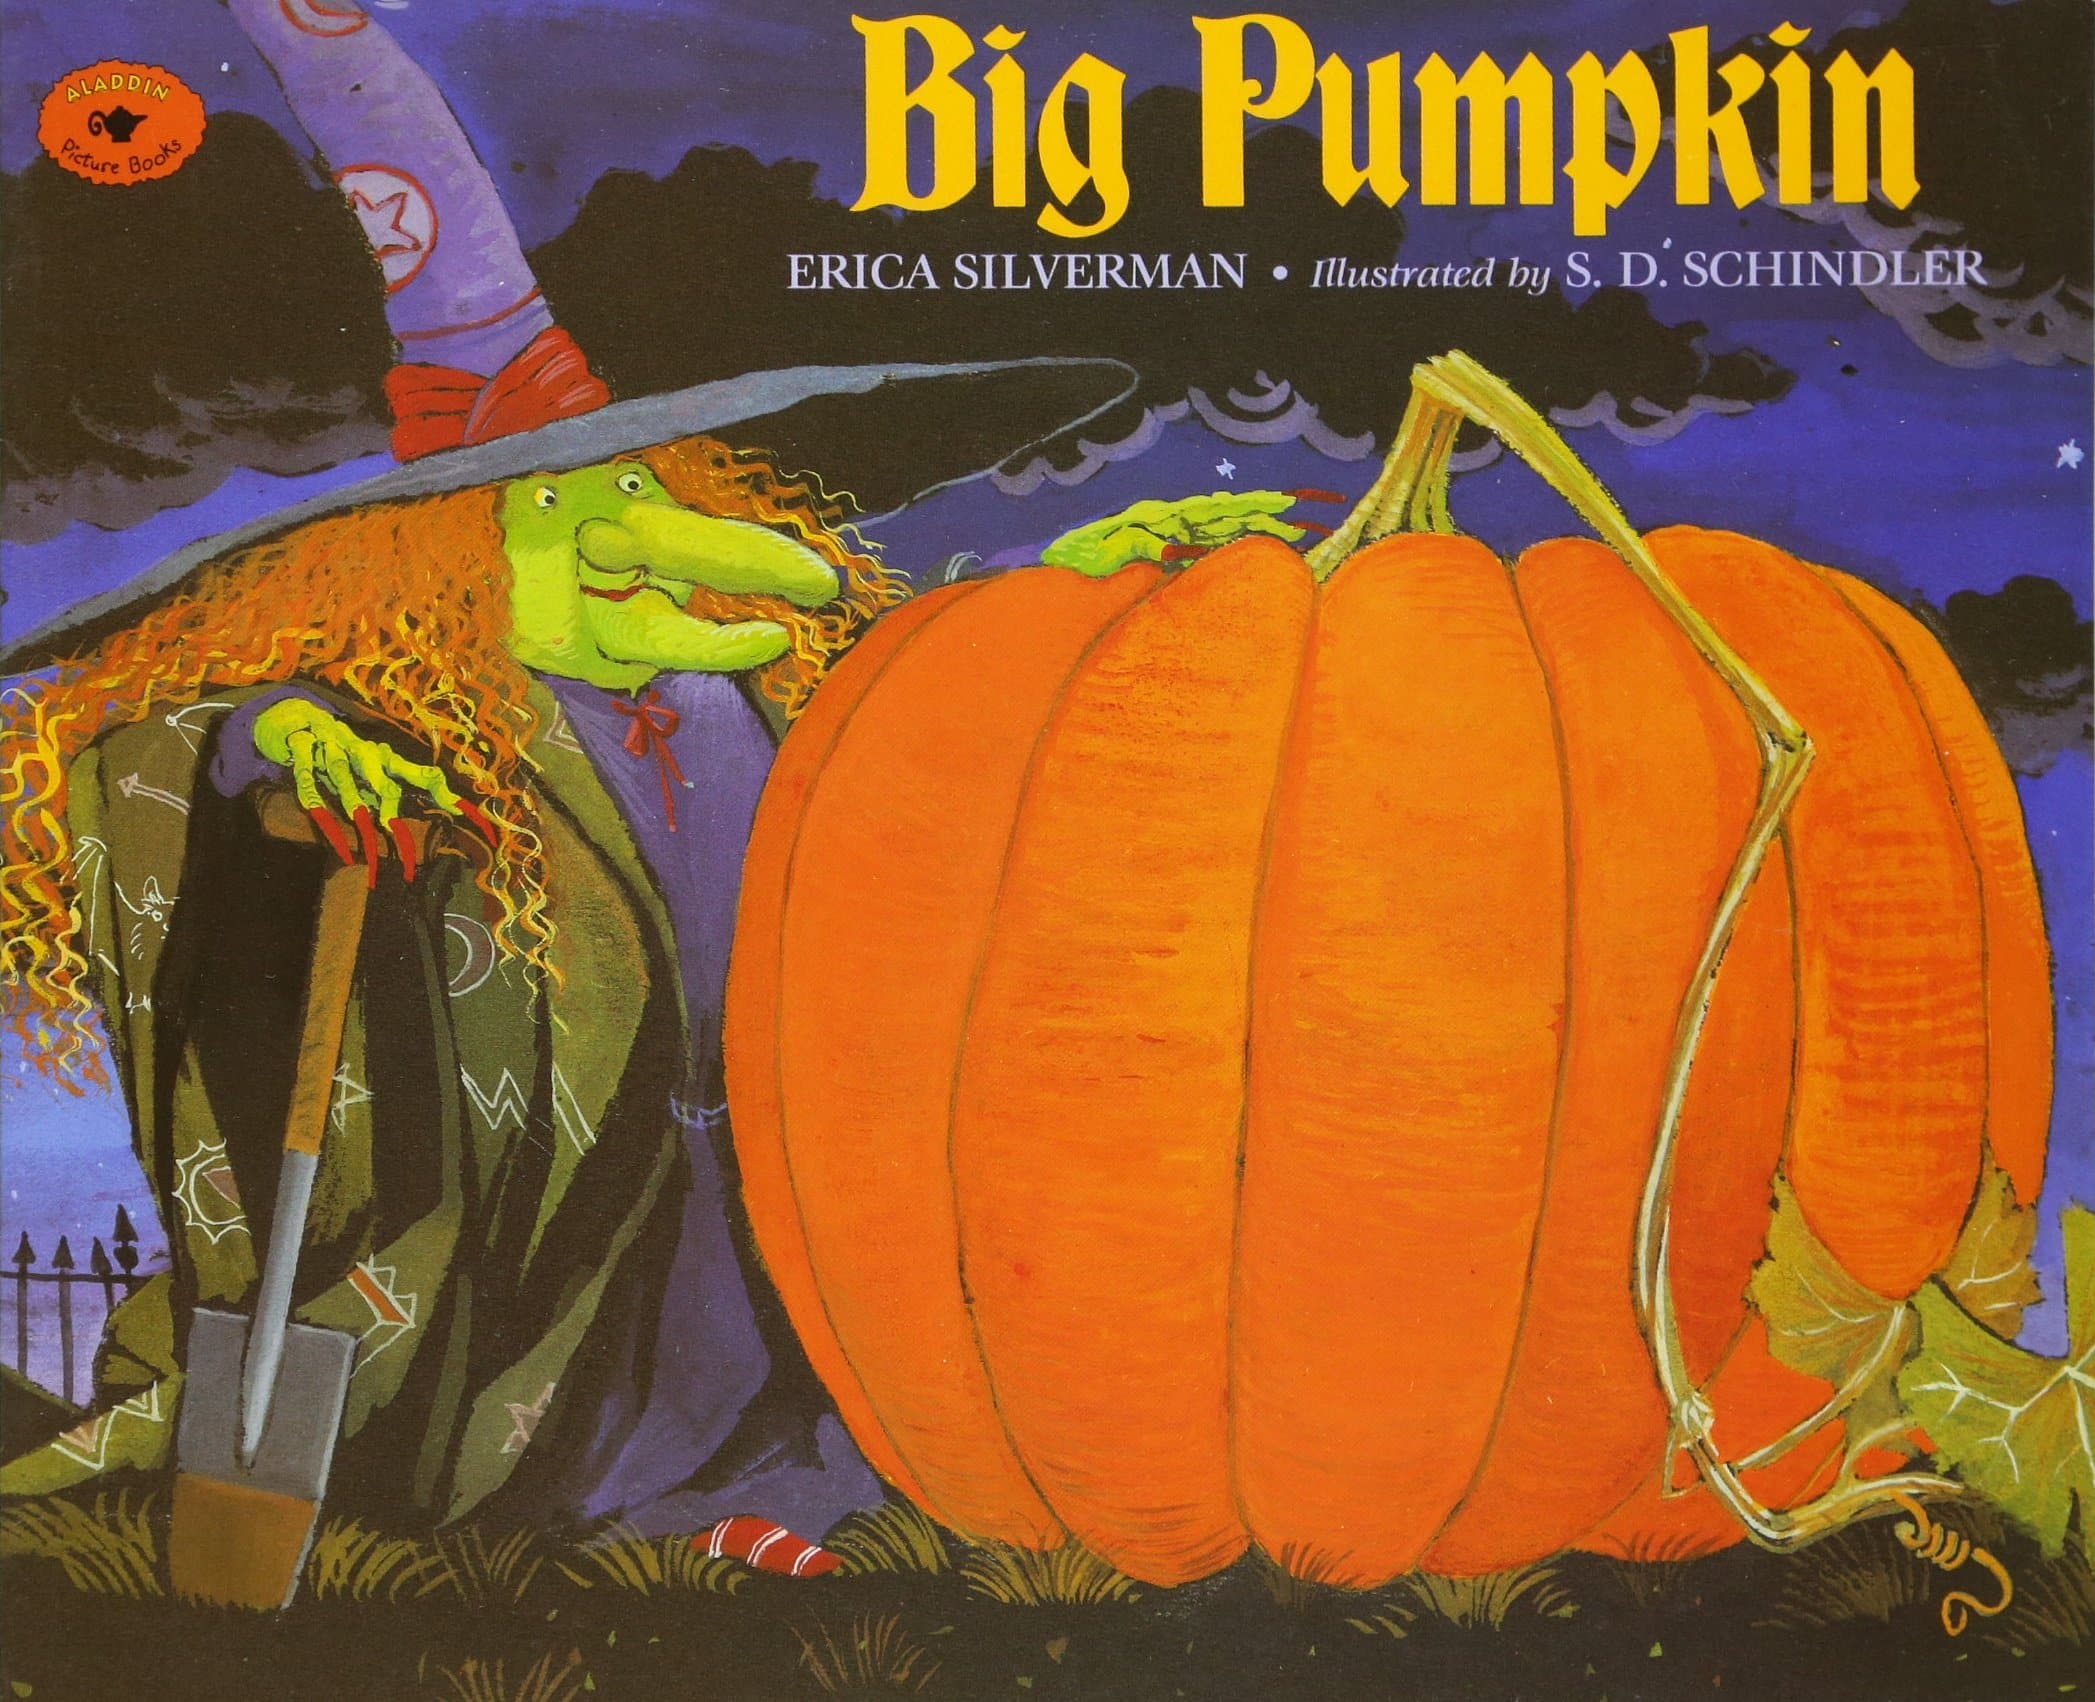 The cover for the book Big Pumpkin